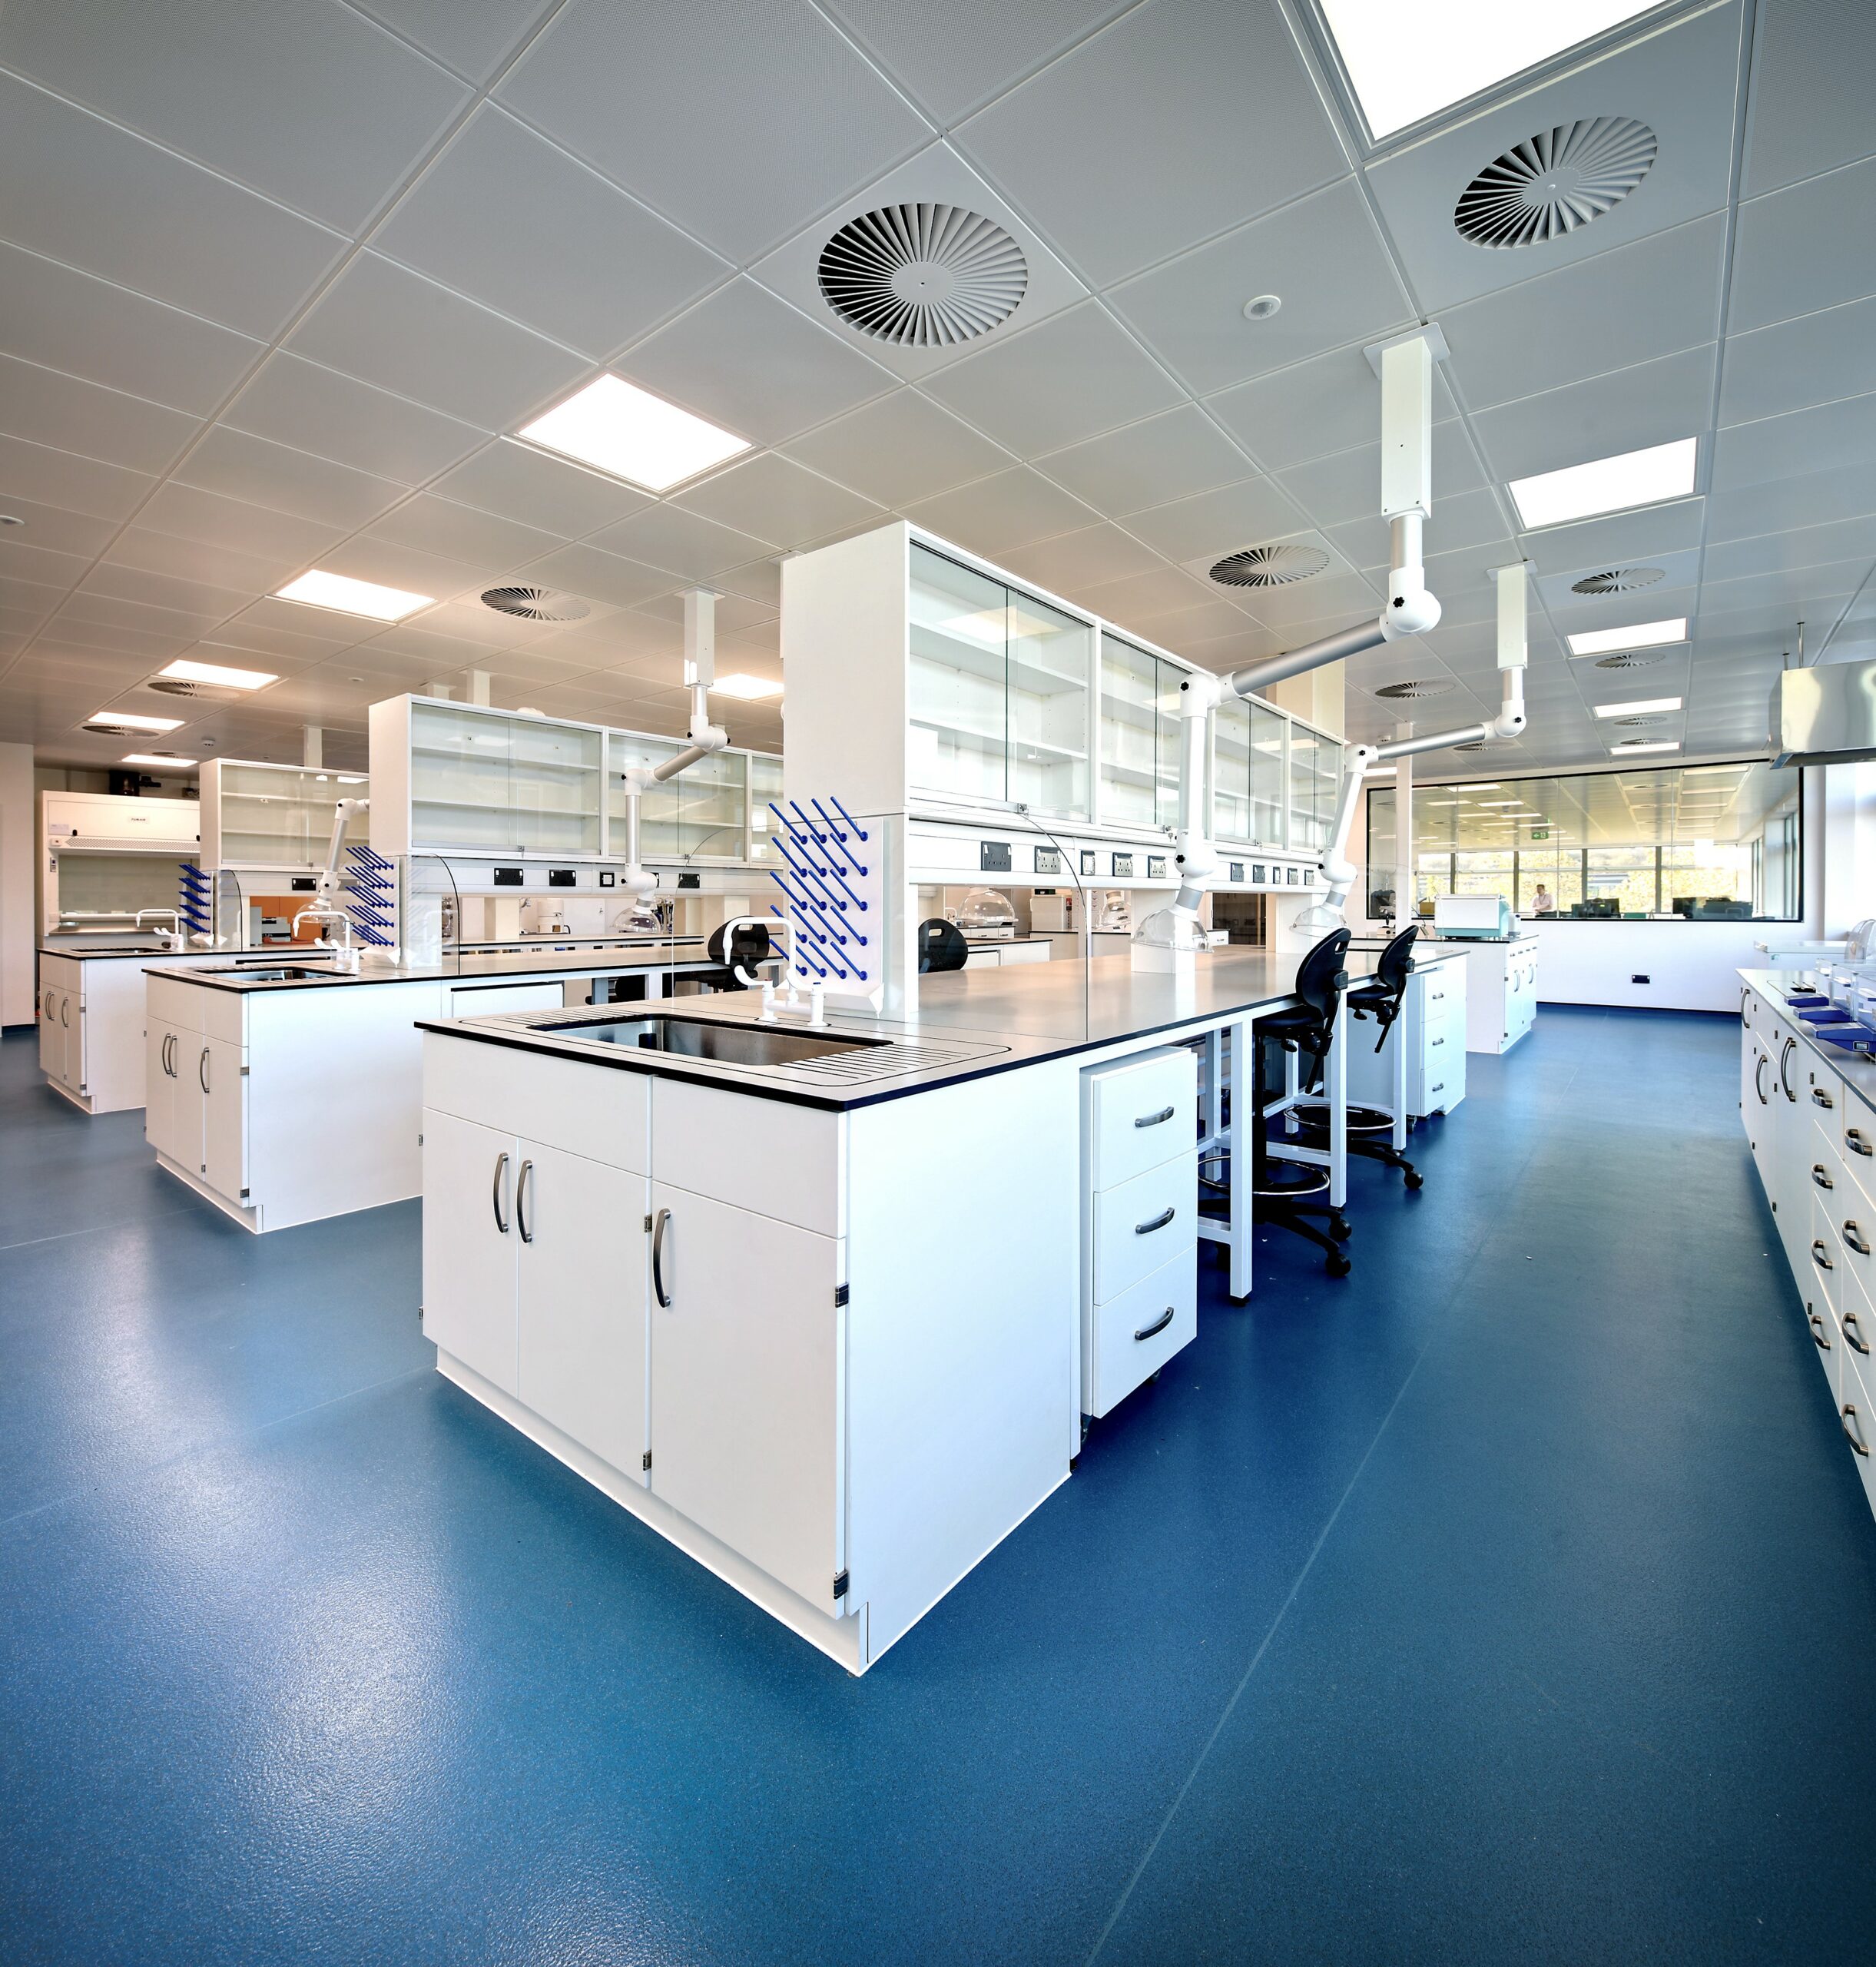 An example of a laboratory design and fit out by Total Laboratories